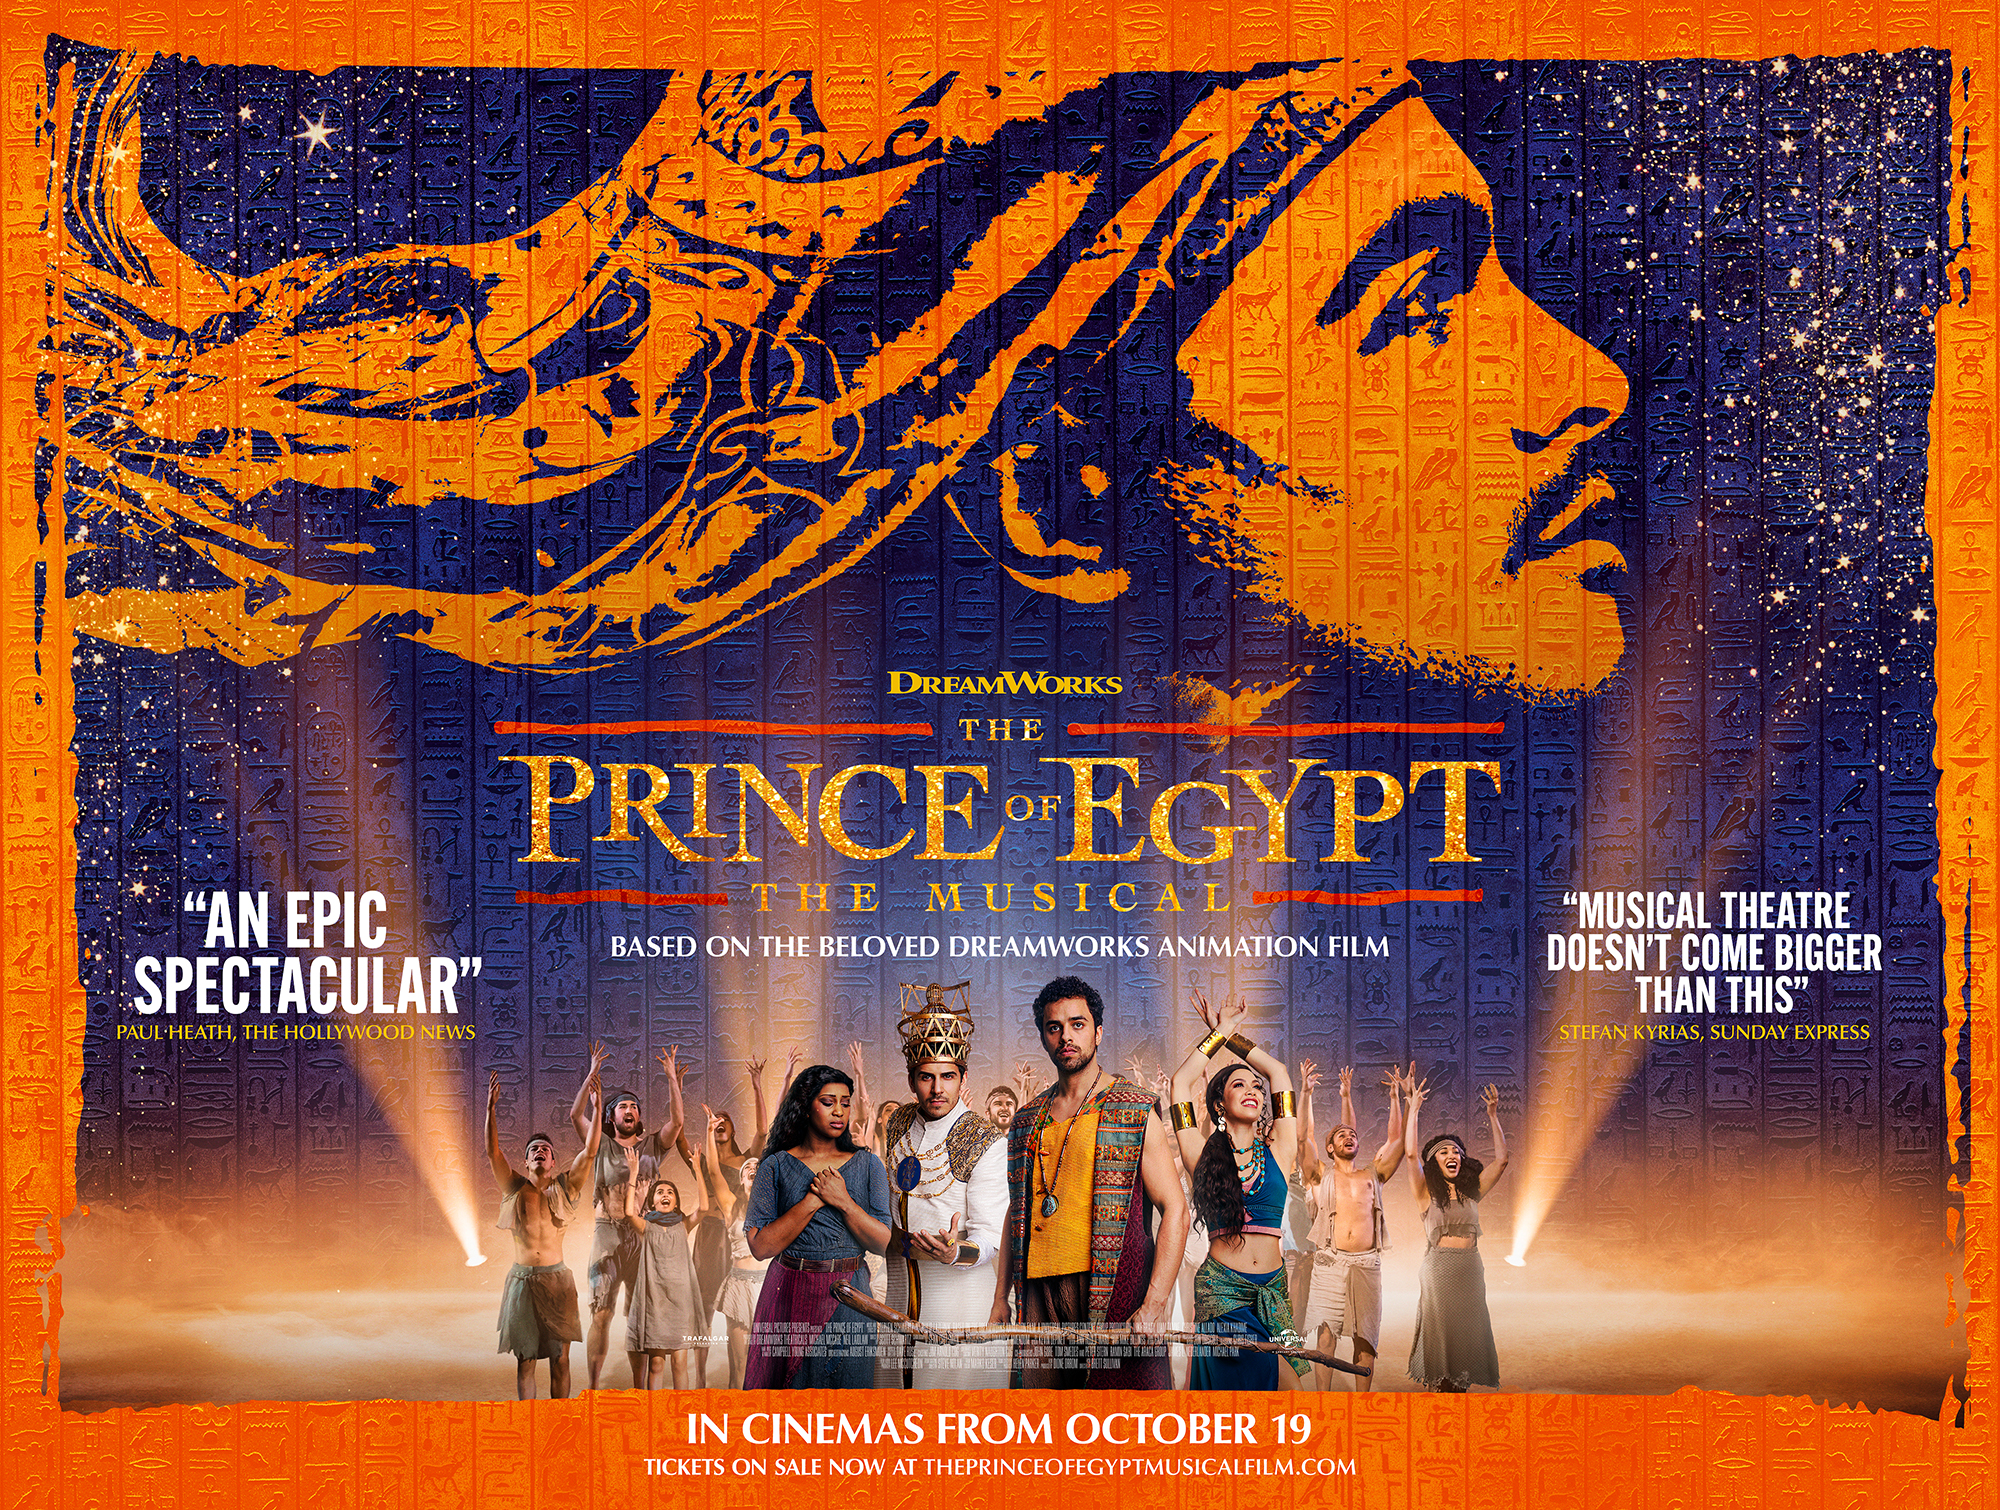 The Prince of Egypt: The Musical (12A)